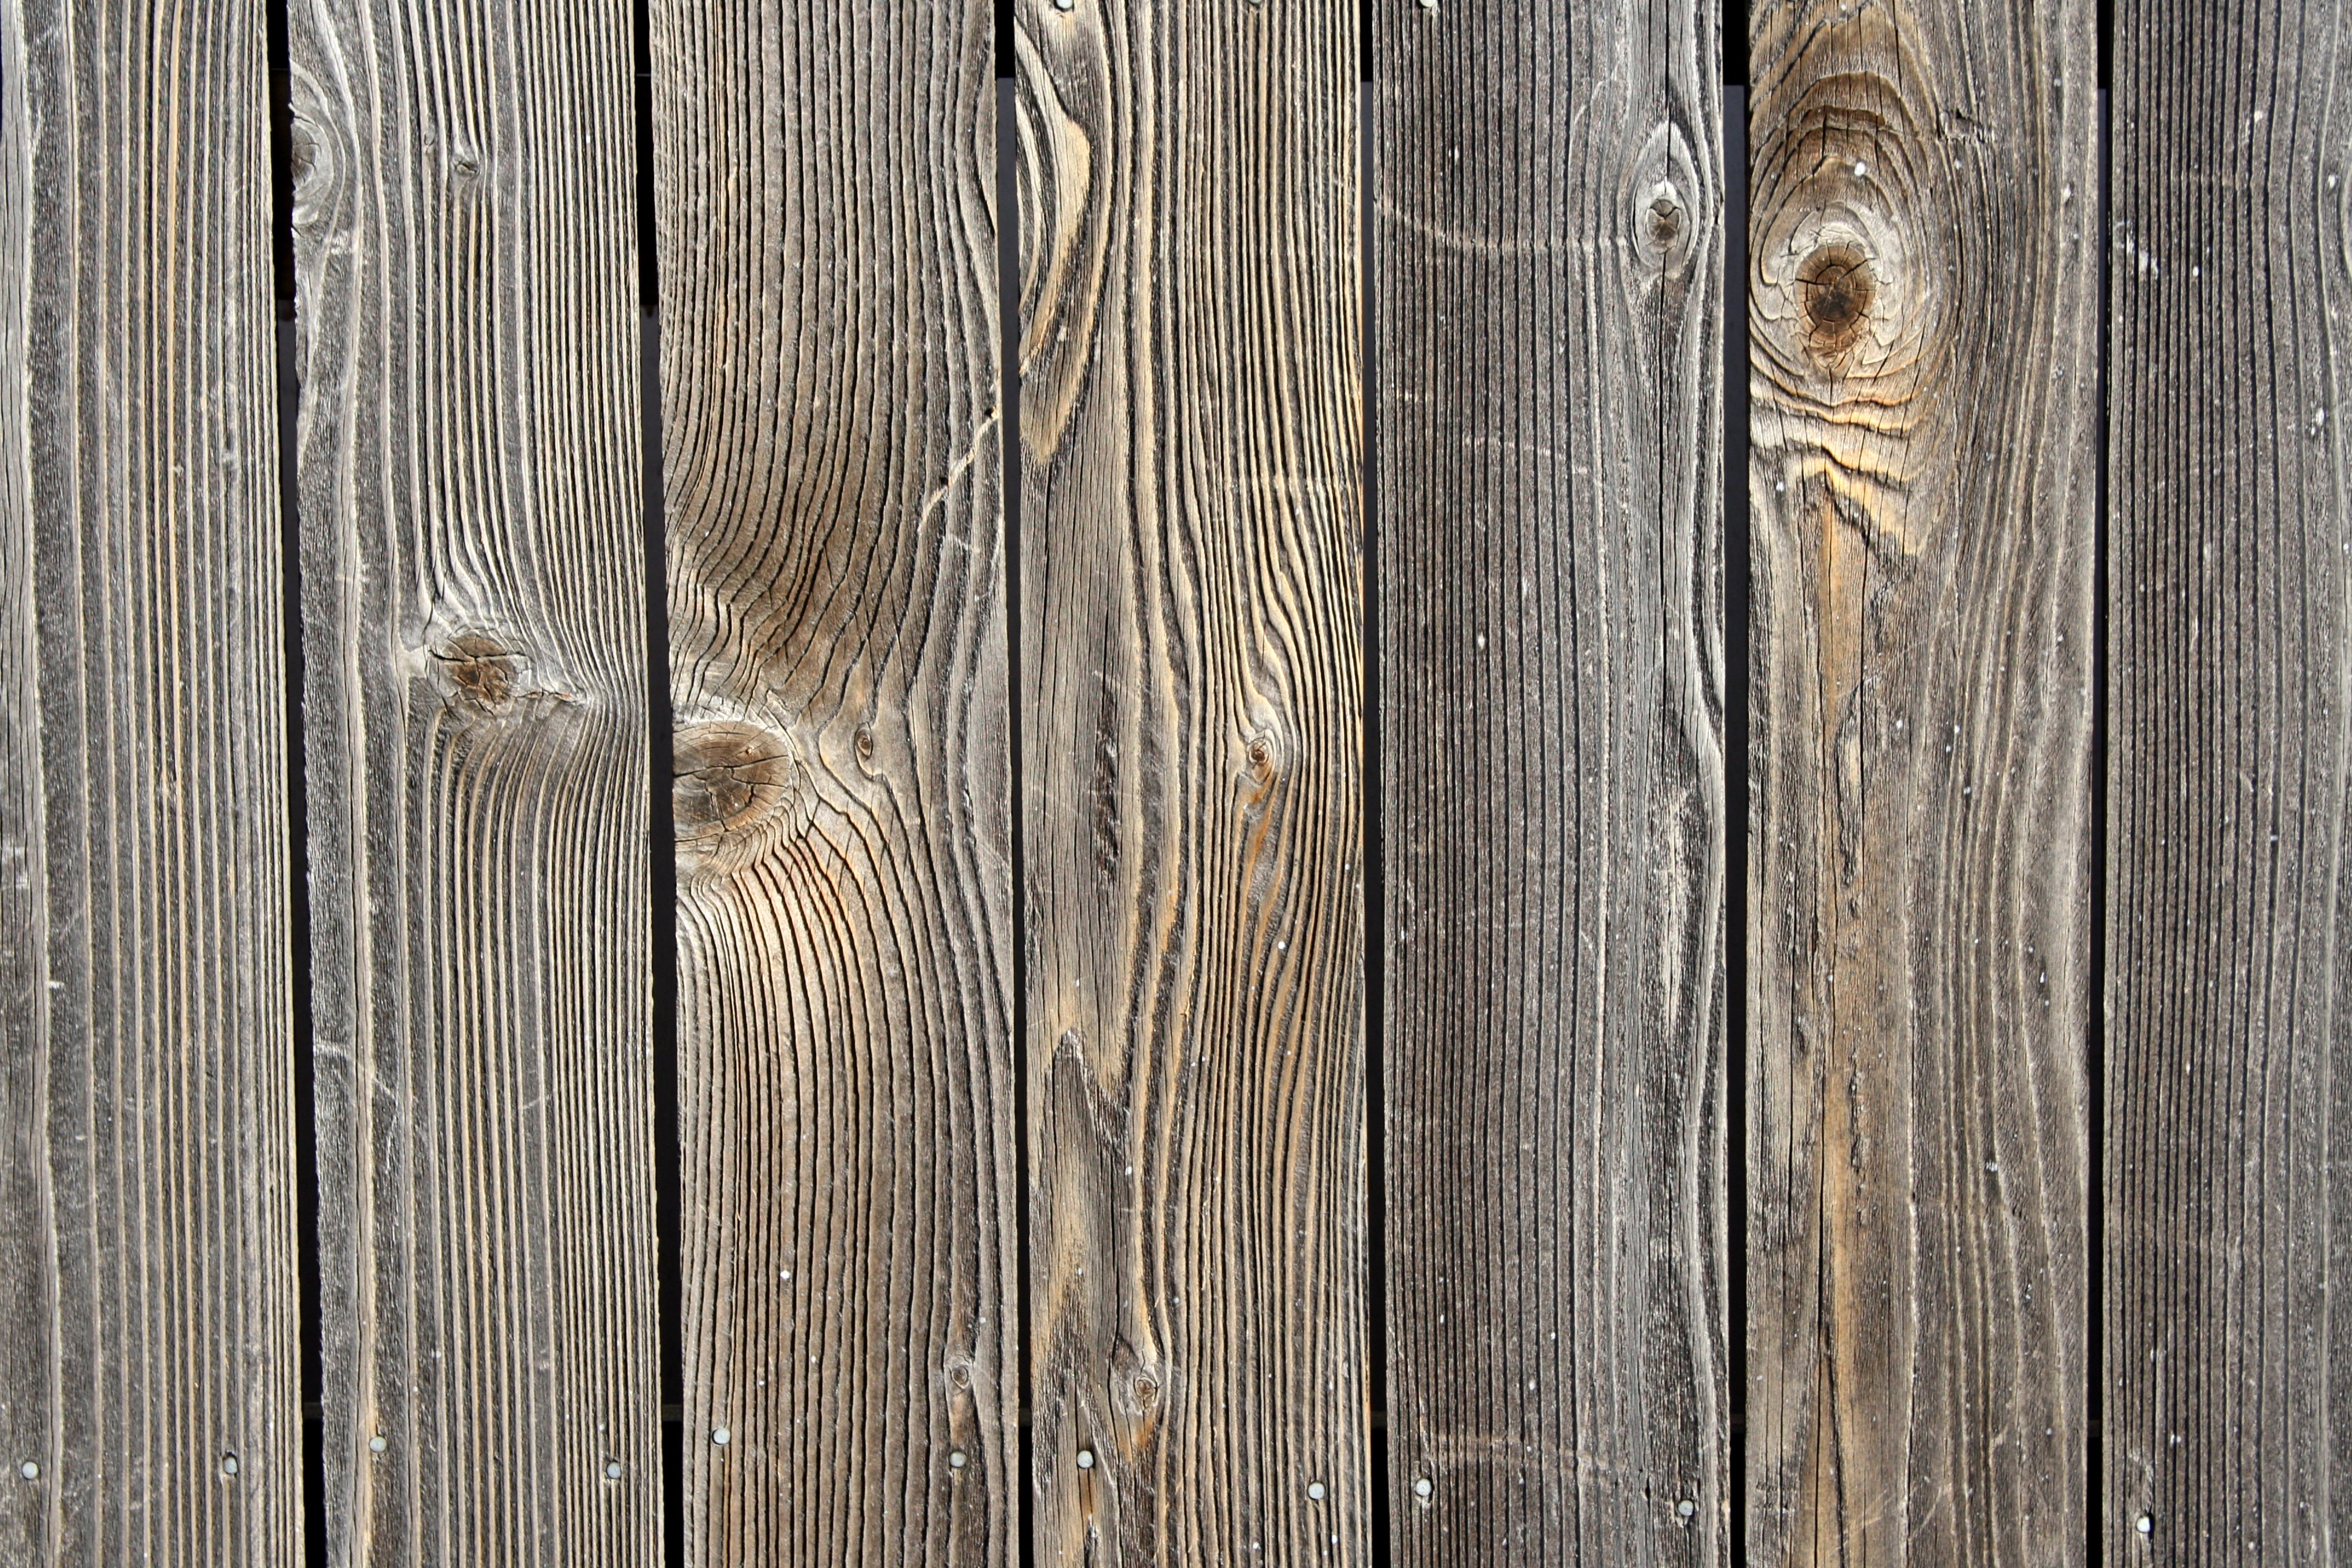 Weathered Wooden Boards Texture Picture   Free Photograph   Photos